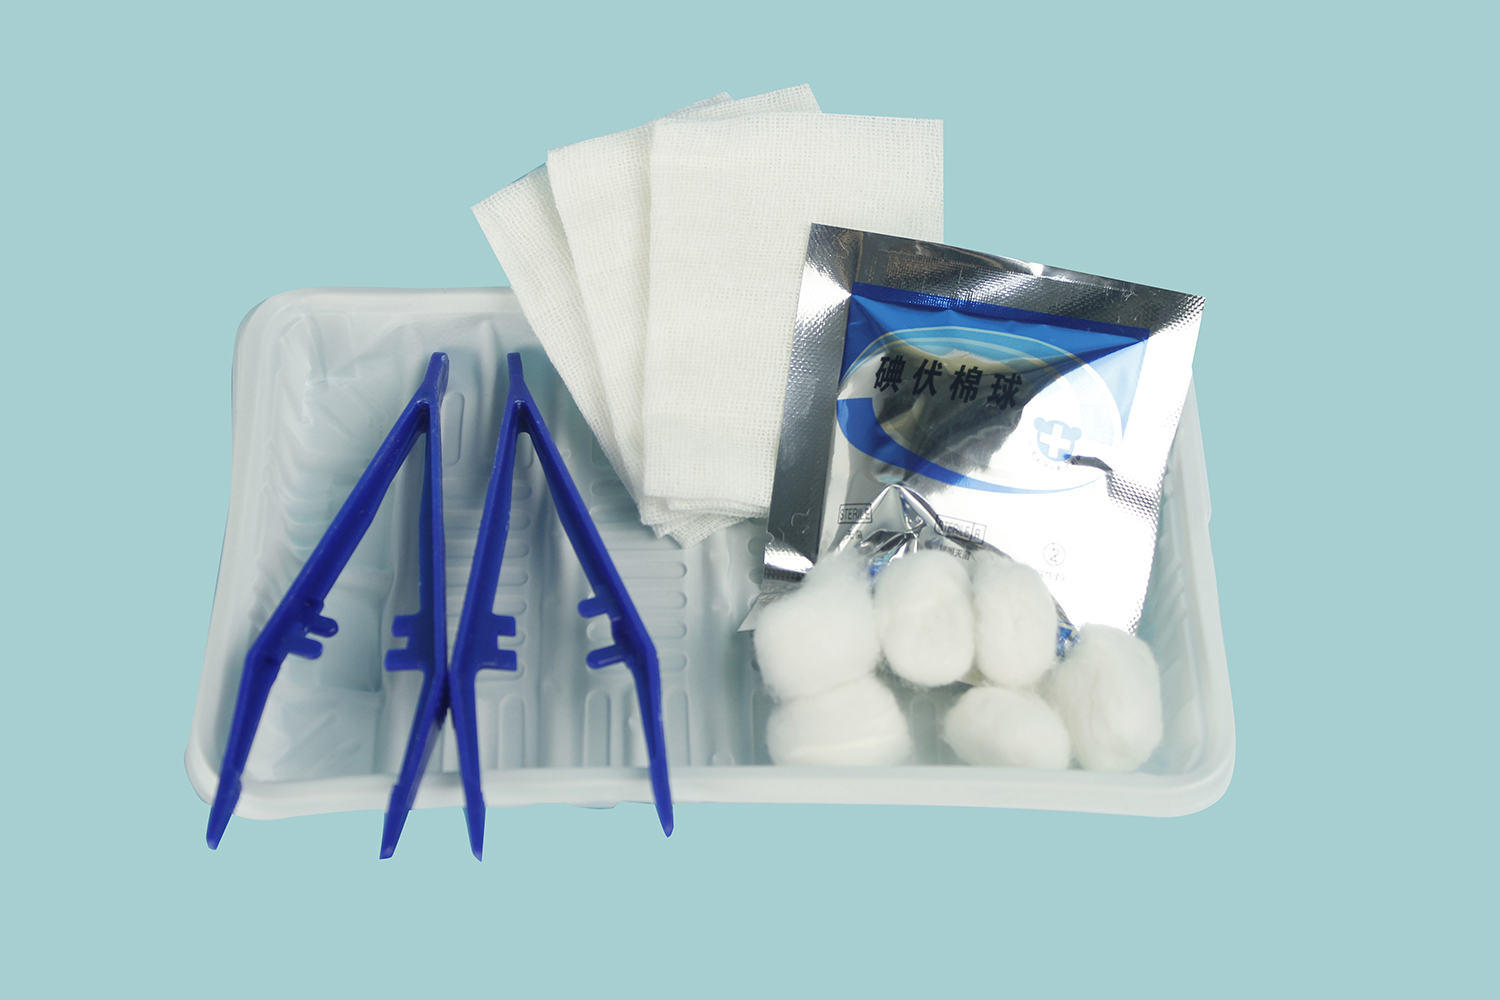 Disposable Wound Dressing Kit for Surgical